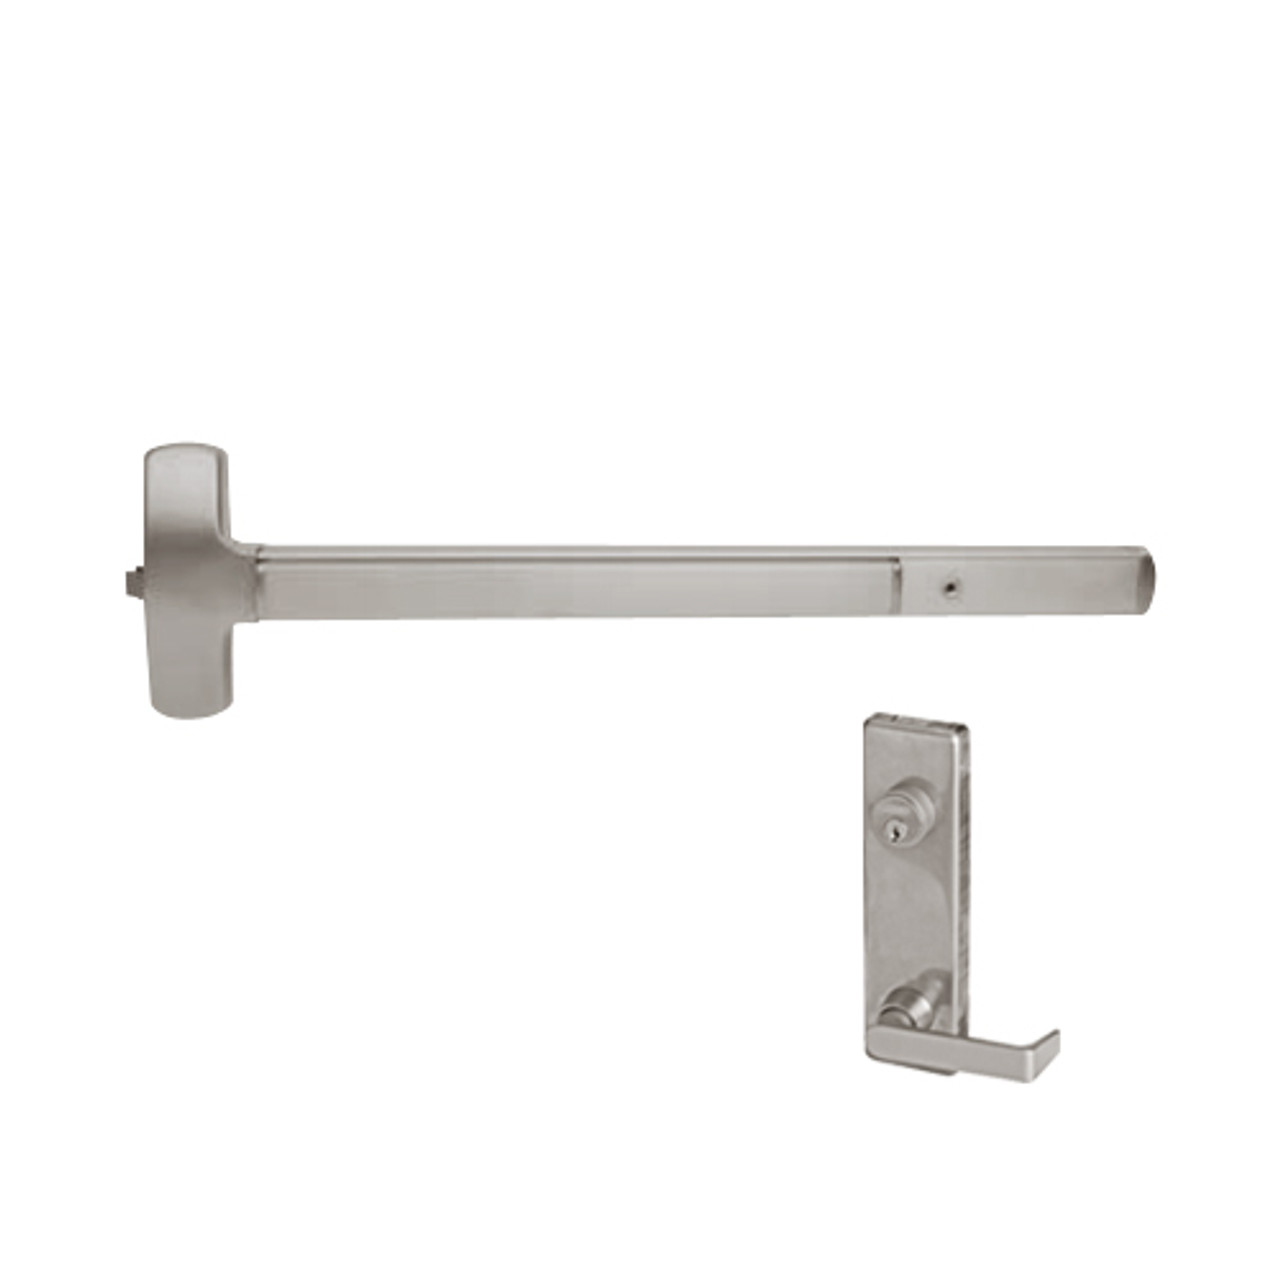 25-R-L-DANE-US32D-4-LHR Falcon Exit Device in Satin Stainless Steel